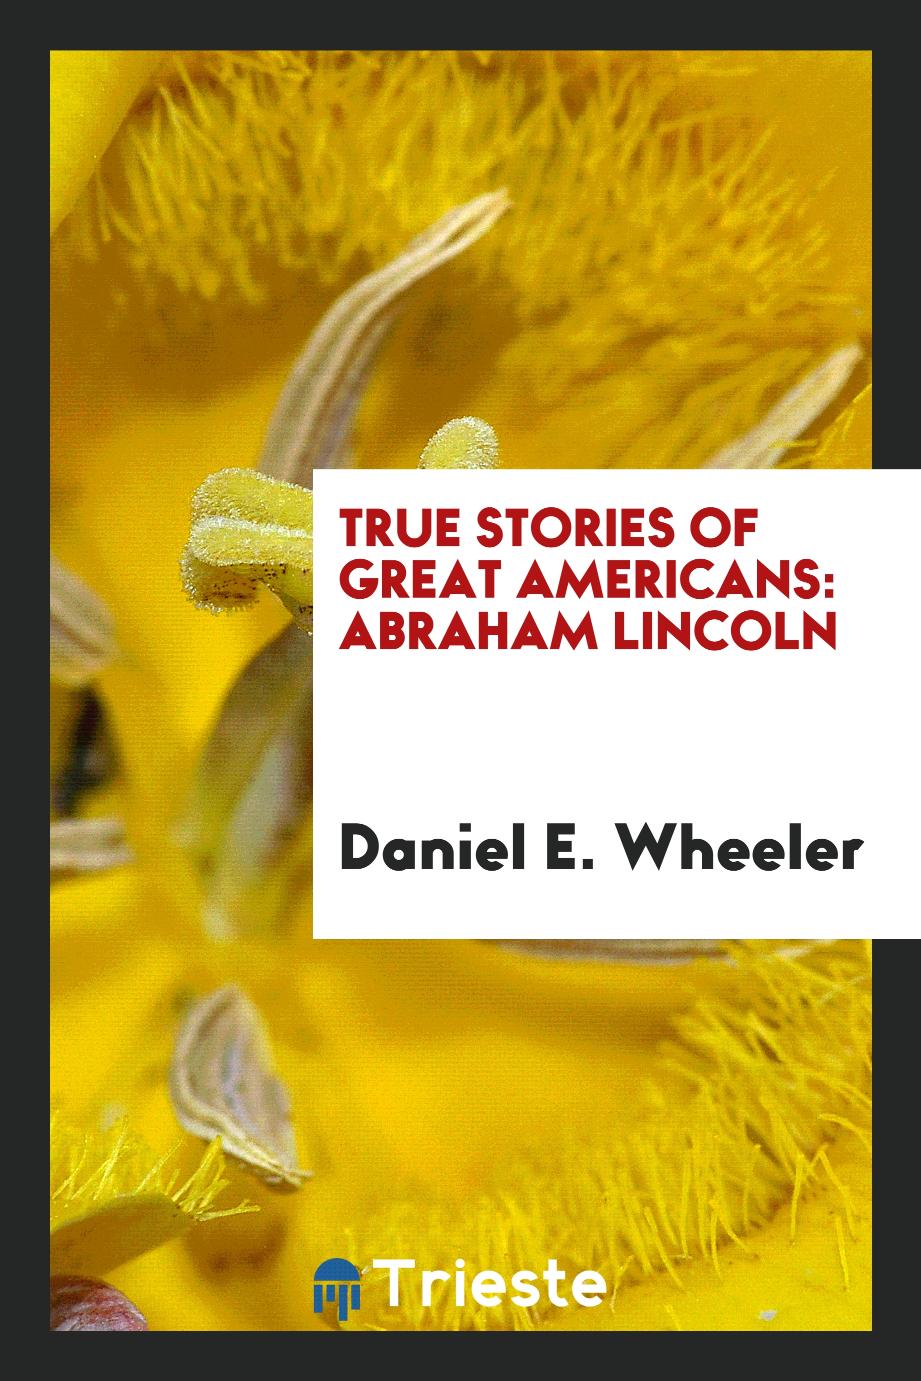 True Stories of Great Americans: Abraham Lincoln